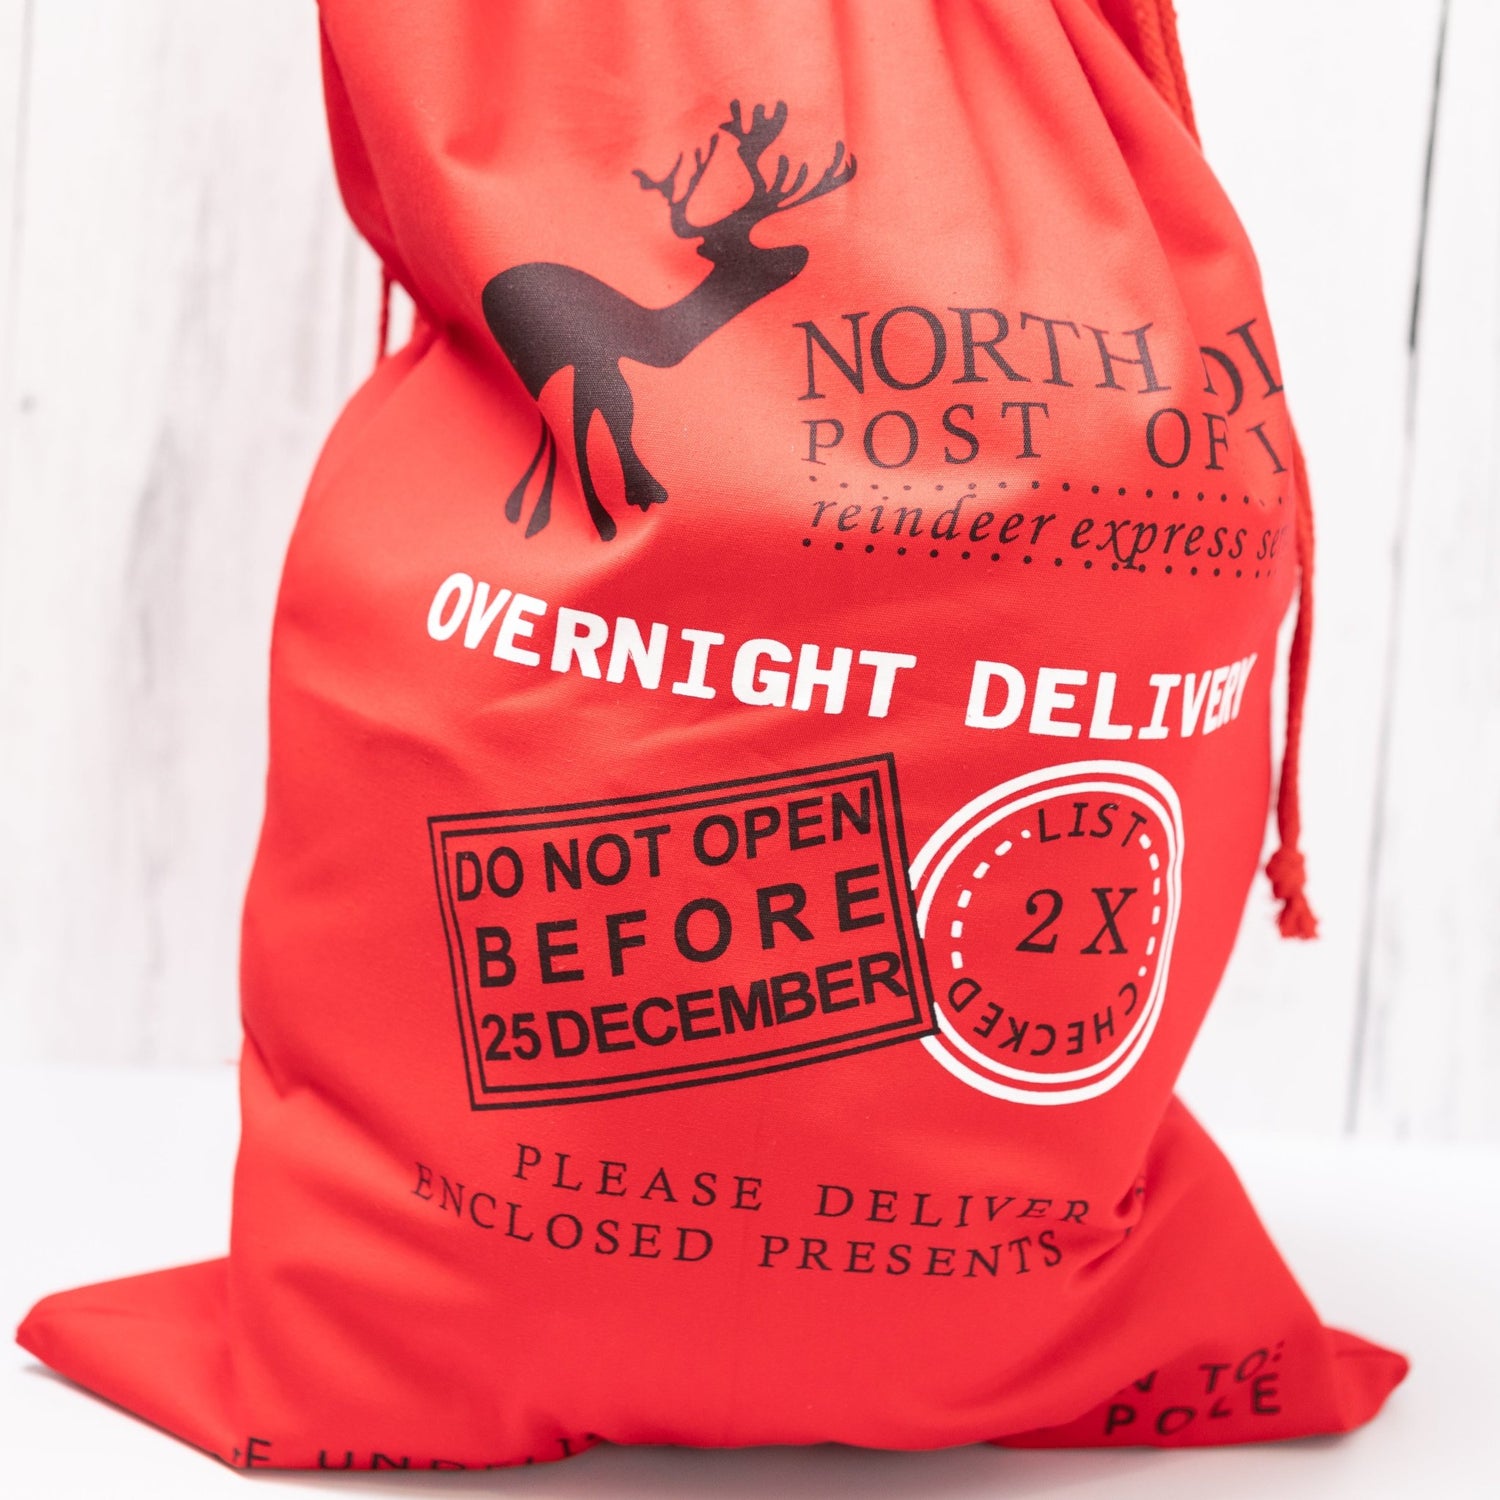 Christmas Gift Bags | Reusable Oversized Fabric with Drawstring Cord - North Pole Post Office Overnight Delivery Logo - Alicia GonzalezGift Bags